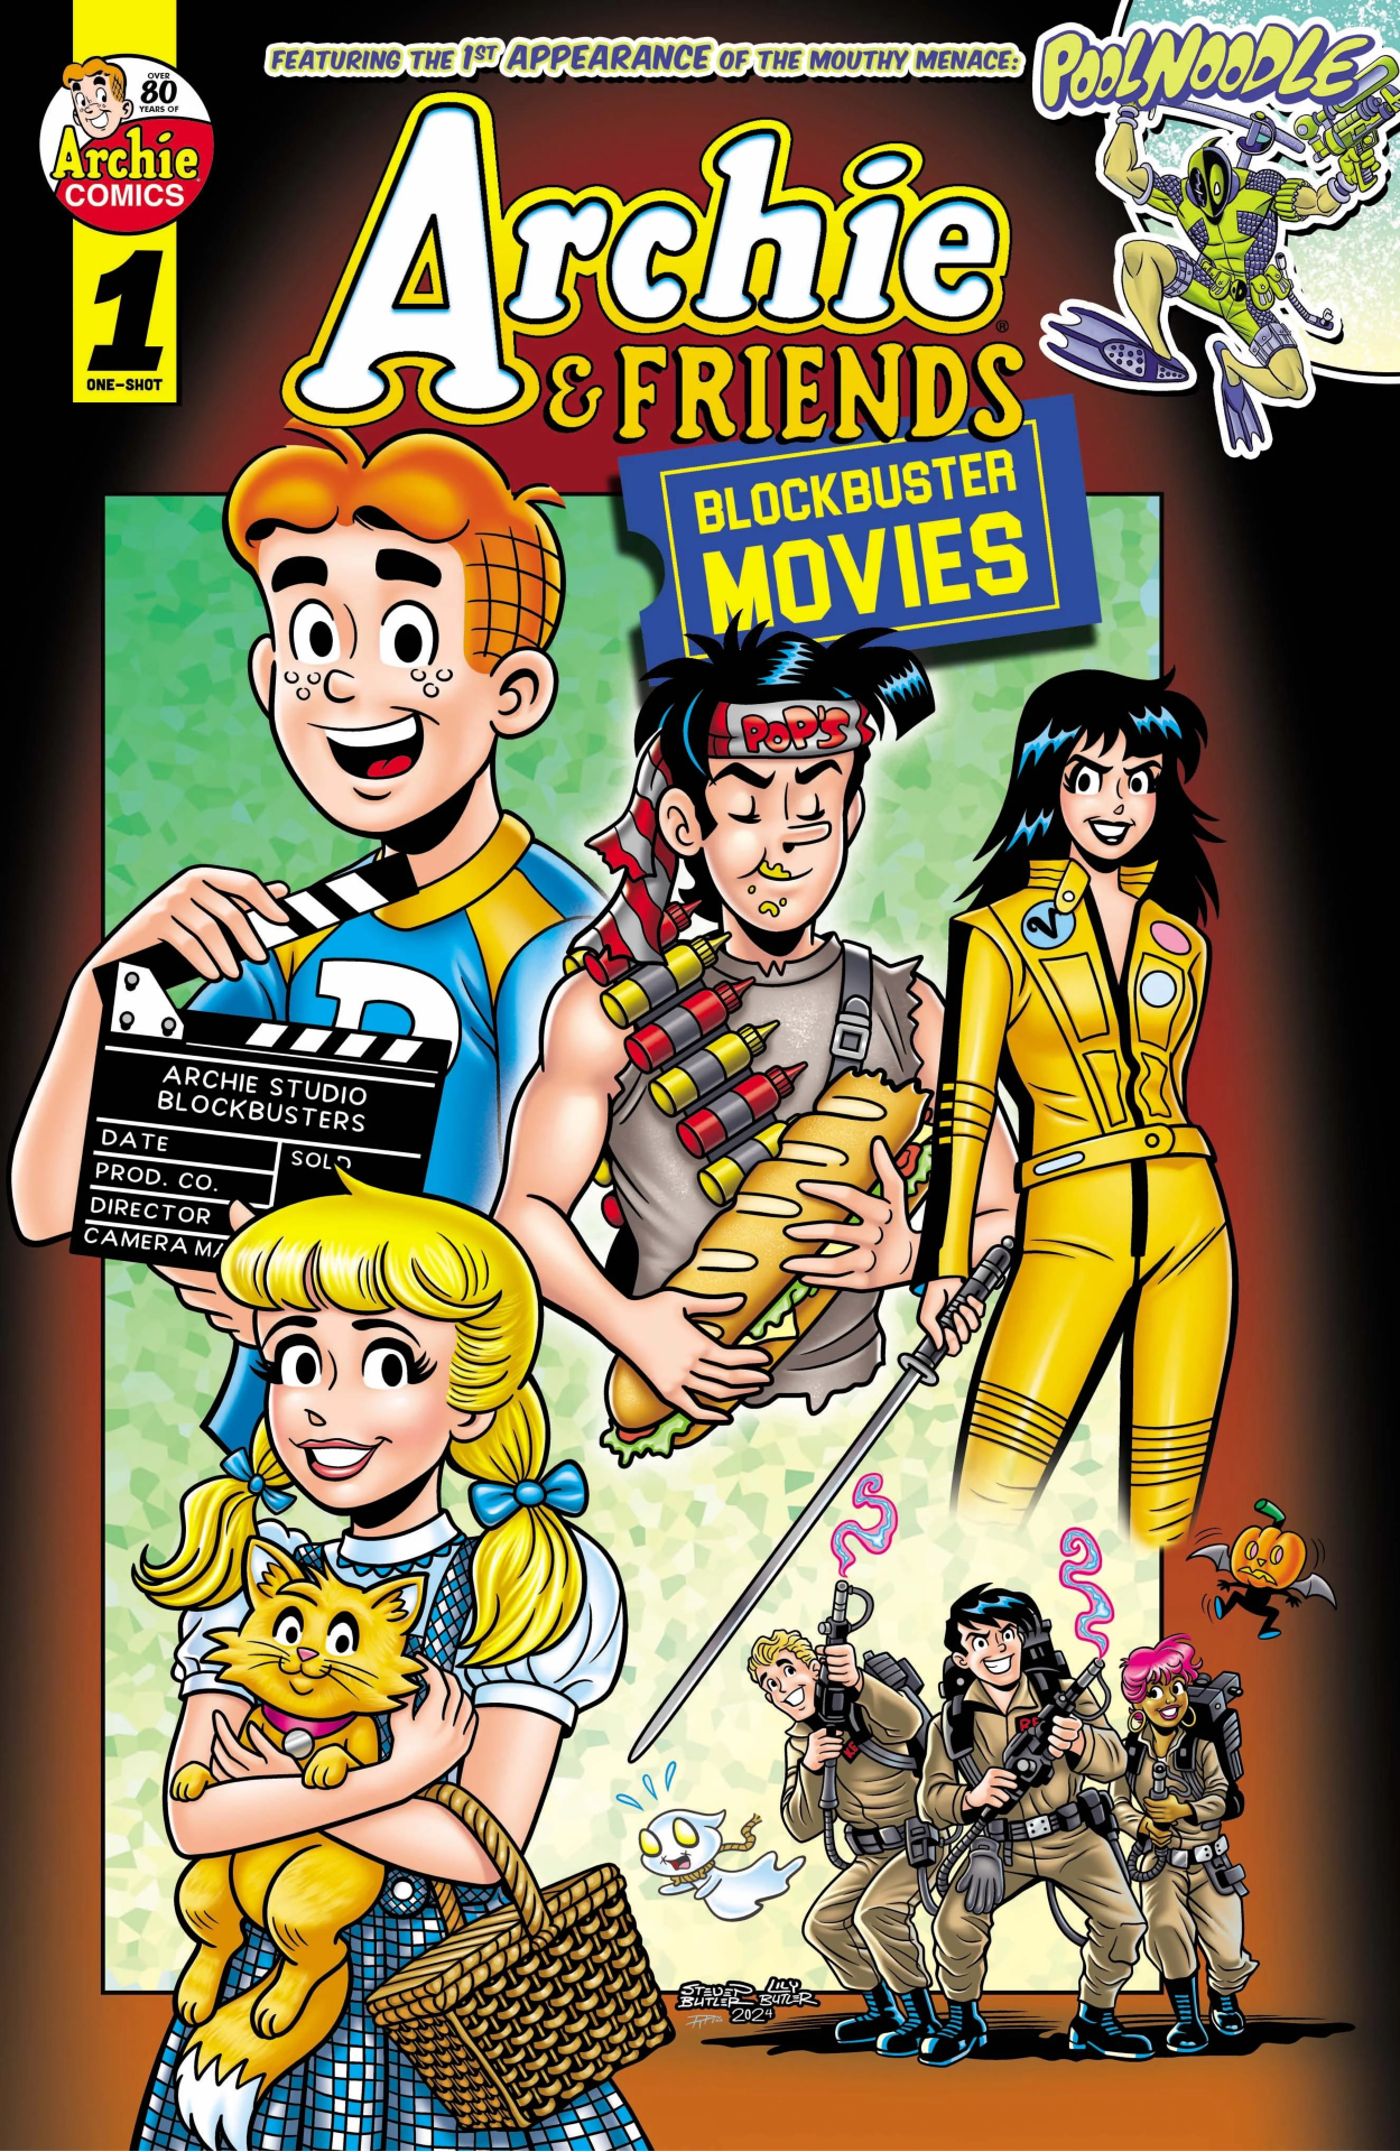 Archie and Friends: Blockbuster Movies #1 Cover Art Featuring Archie with a Clapboard, Betty as Dorothy Gale, Jughead as Rambo, Veronica as the Bride from Kill Bill and more